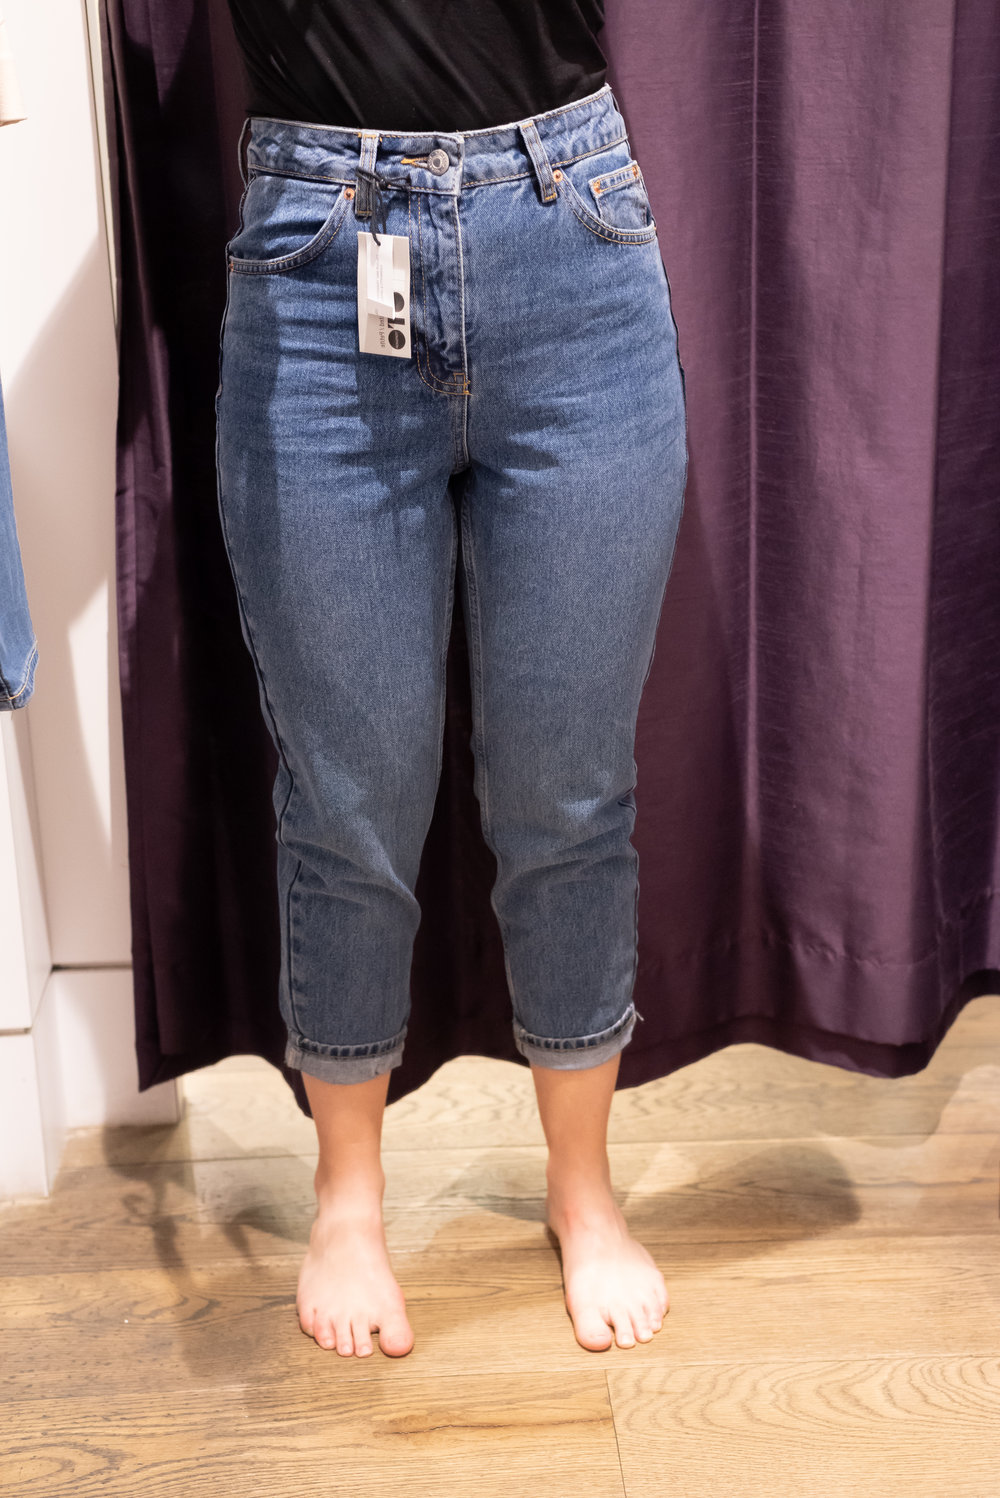 THE BEST AND WORST TOPSHOP JEANS FOR PETITES — The Petite Pear Project